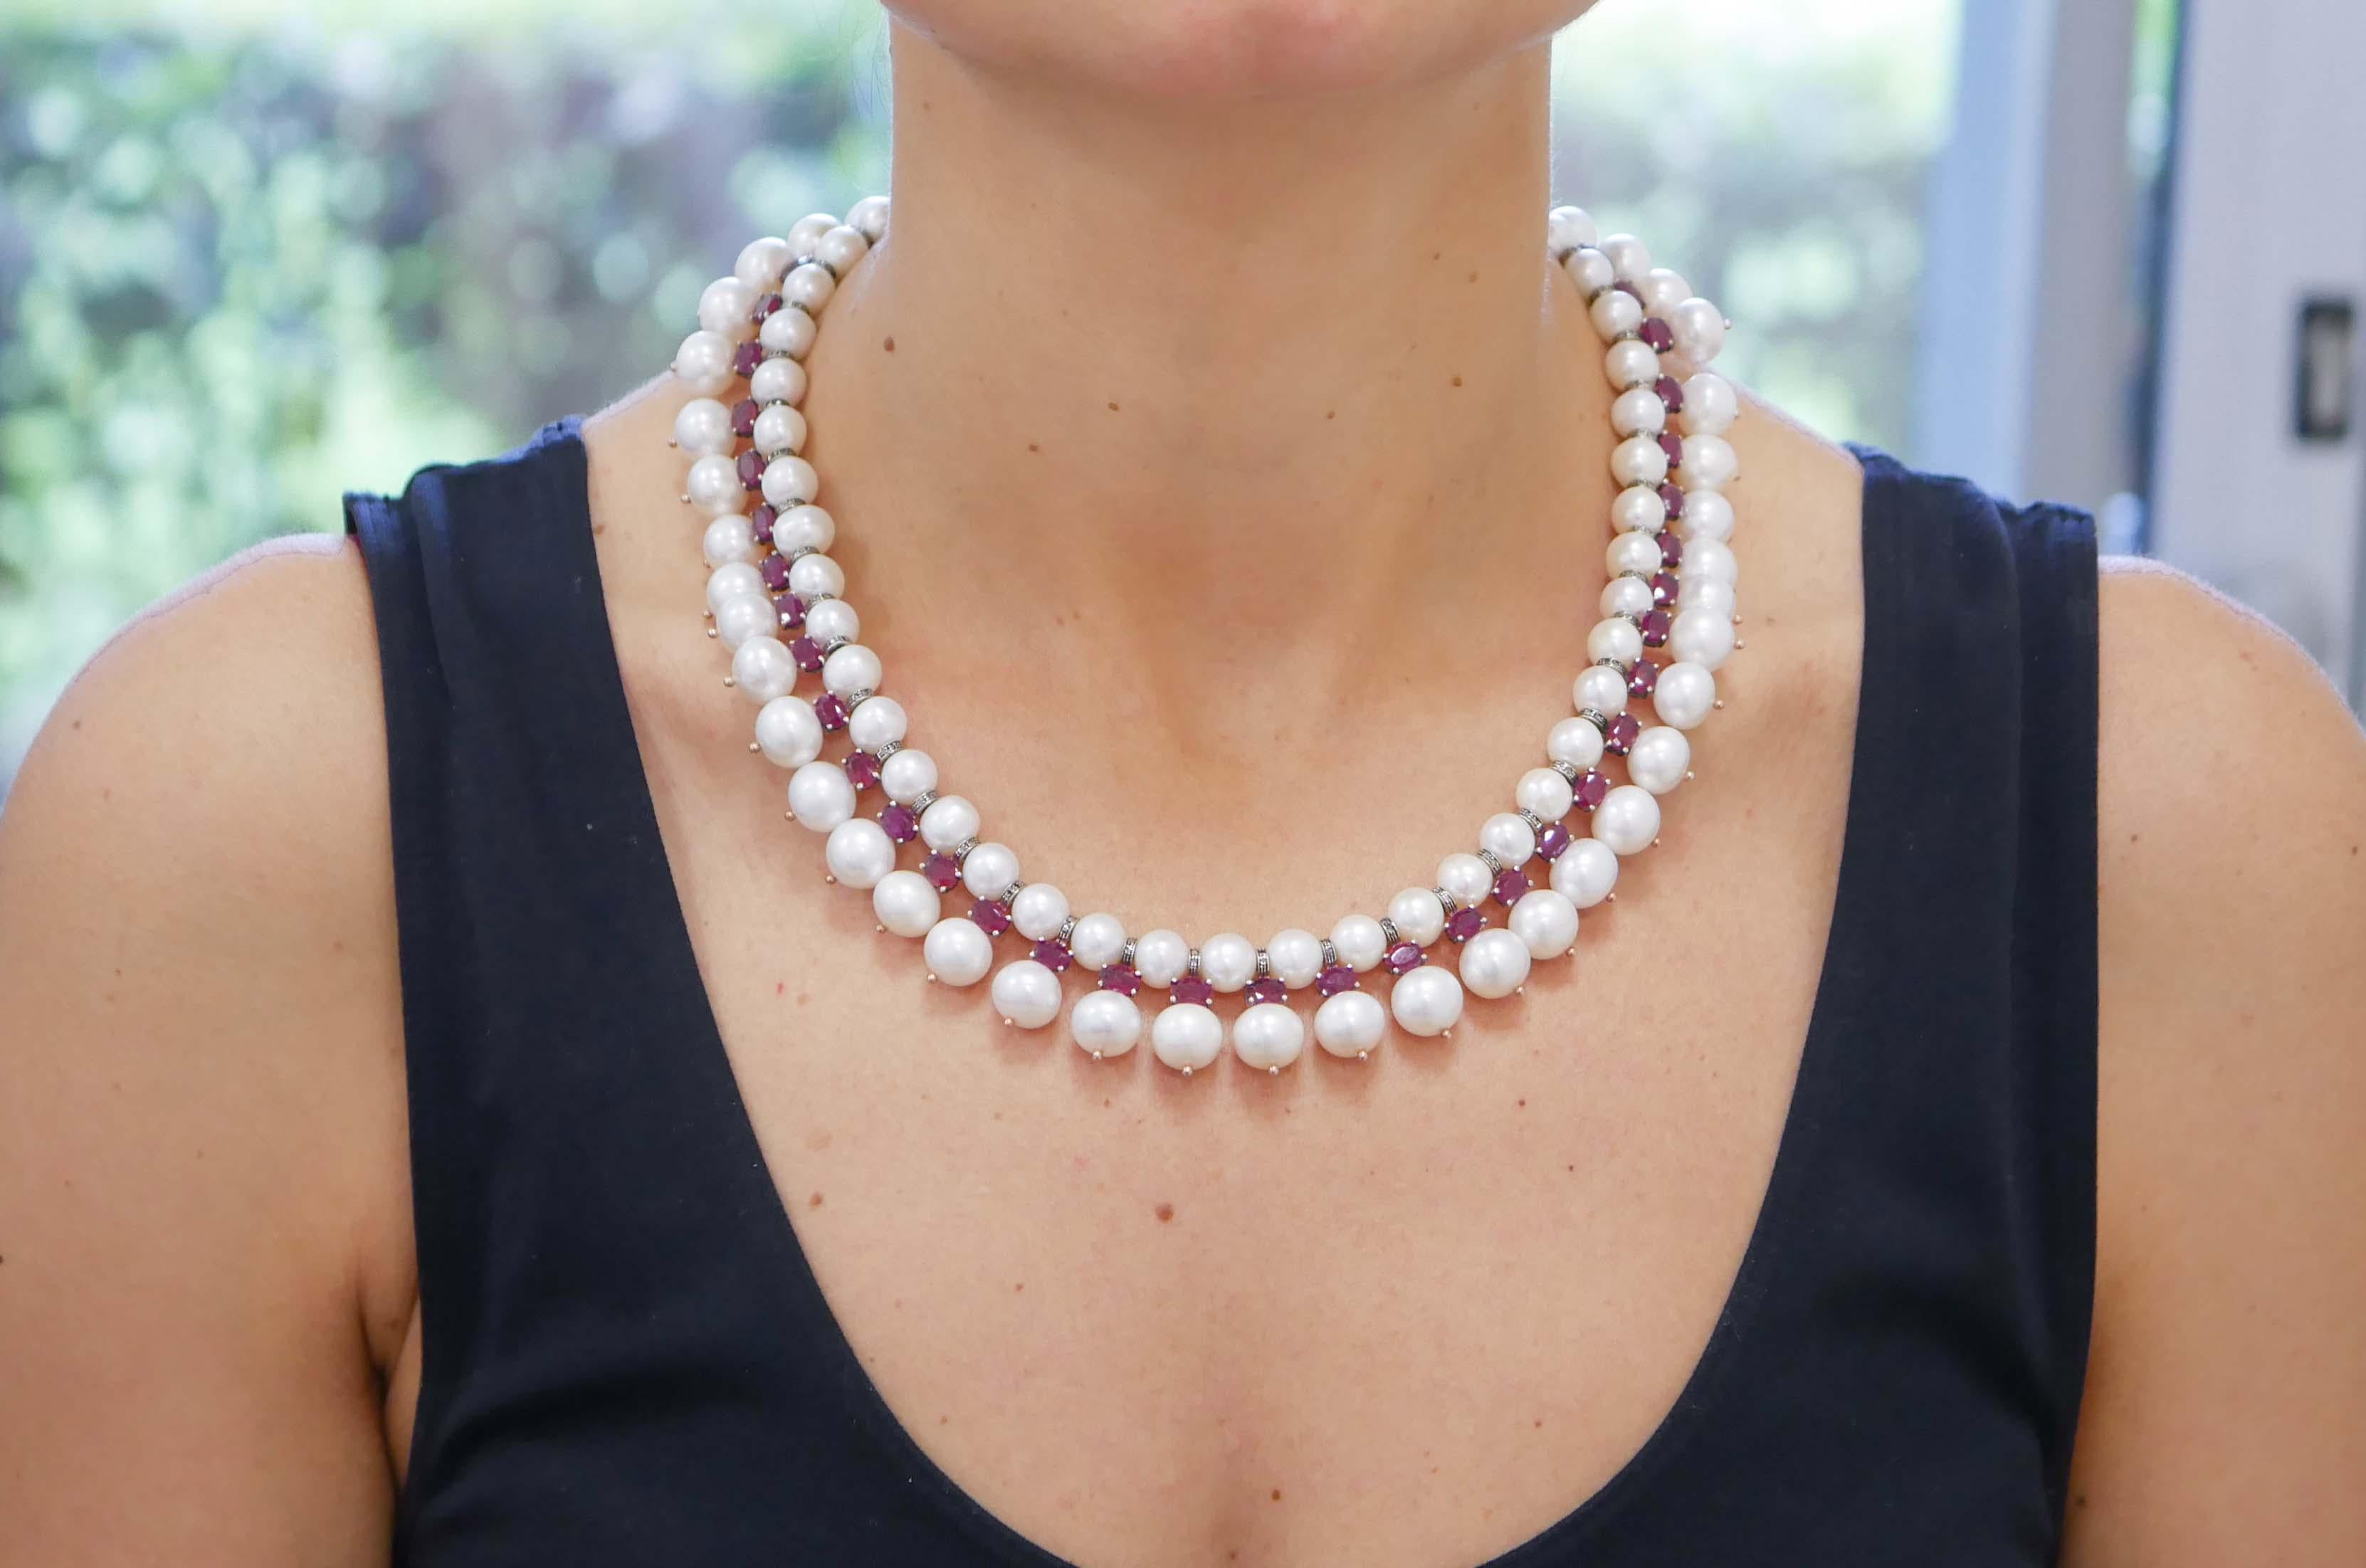 Mixed Cut Diamonds, Rubies, White Pearls, Rose Gold and Silver Retrò Necklace